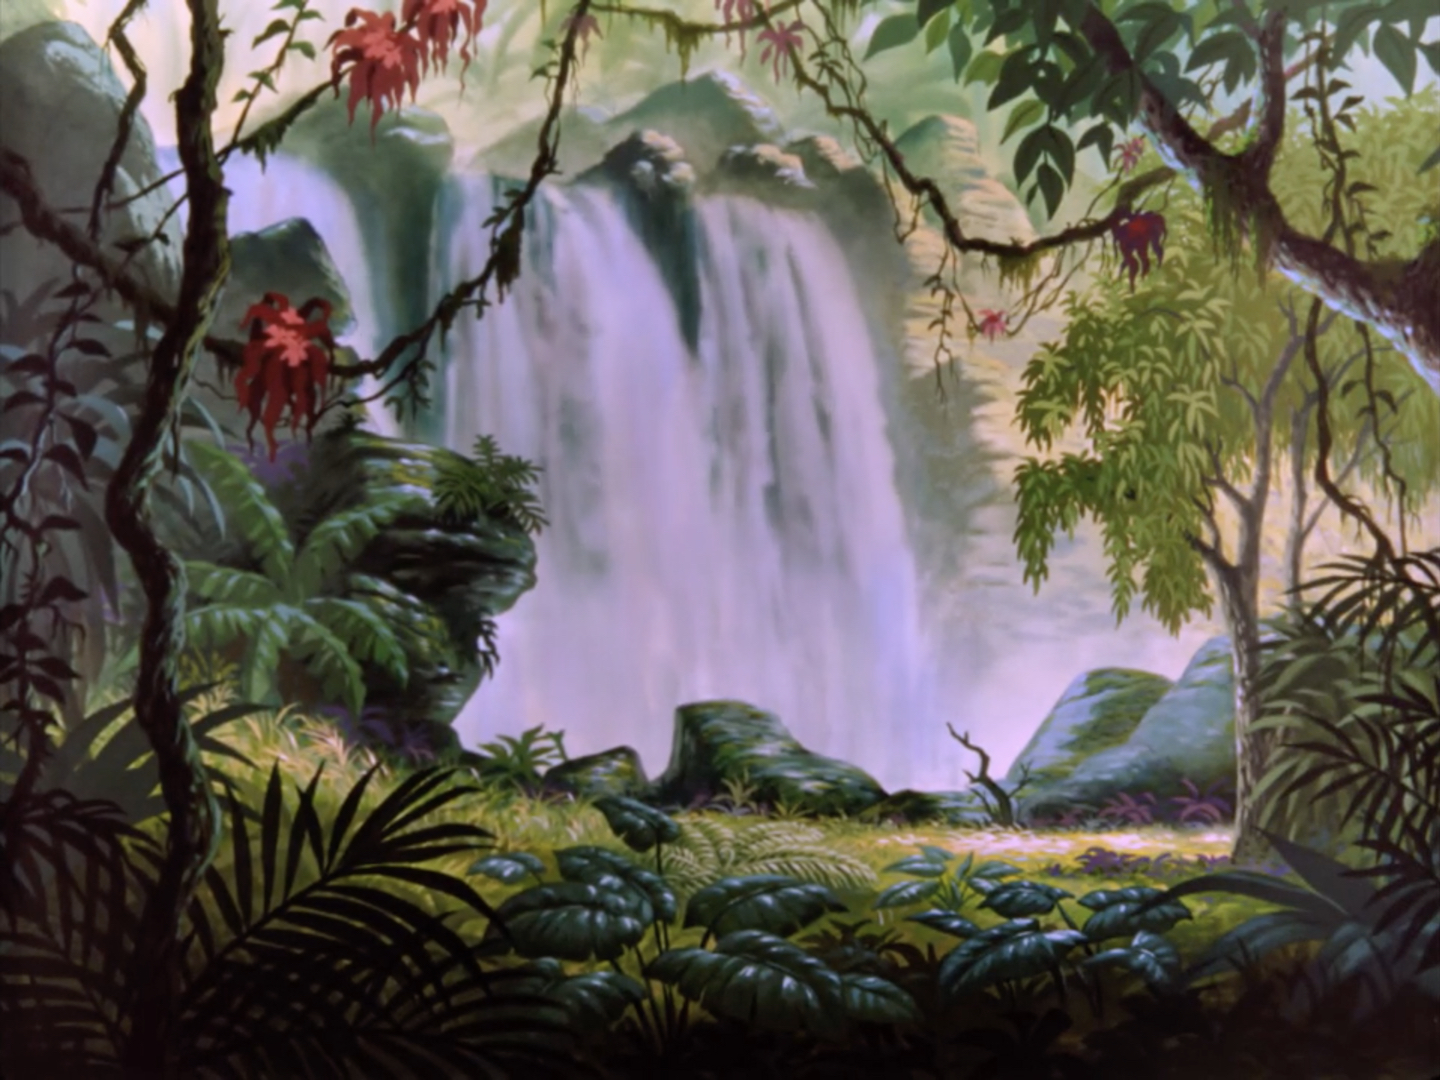 https://static.wikia.nocookie.net/disney/images/4/47/Jungle.jpg/revision/latest?cb=20230822032544